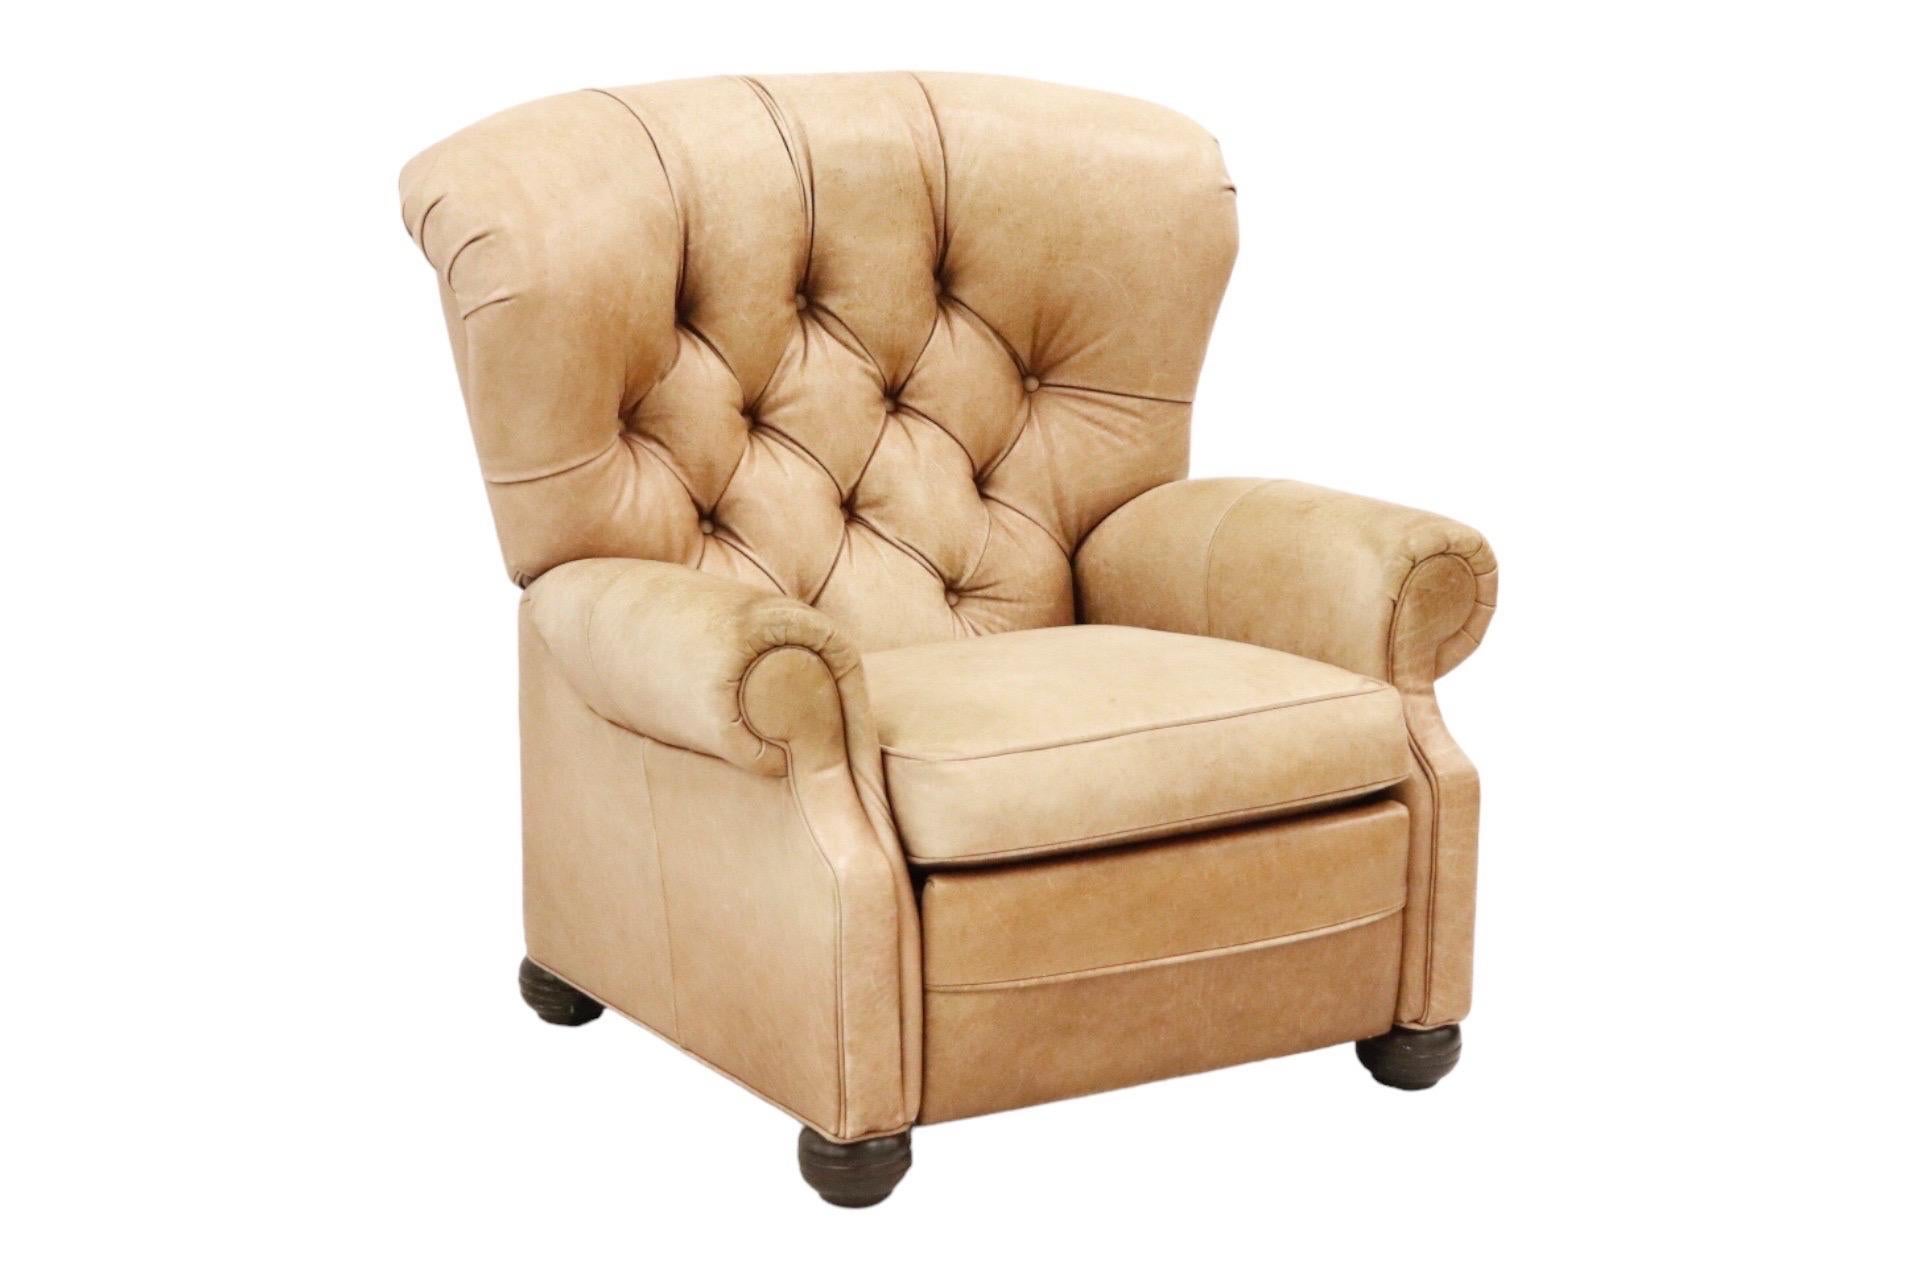 A reclining wingback chair upholstered throughout in brown leather. The inside back is diamond button tufted, and reclines, and the front panel of the chair lifts to become a foot rest. The chair is framed with outward rolled panel arms and finished